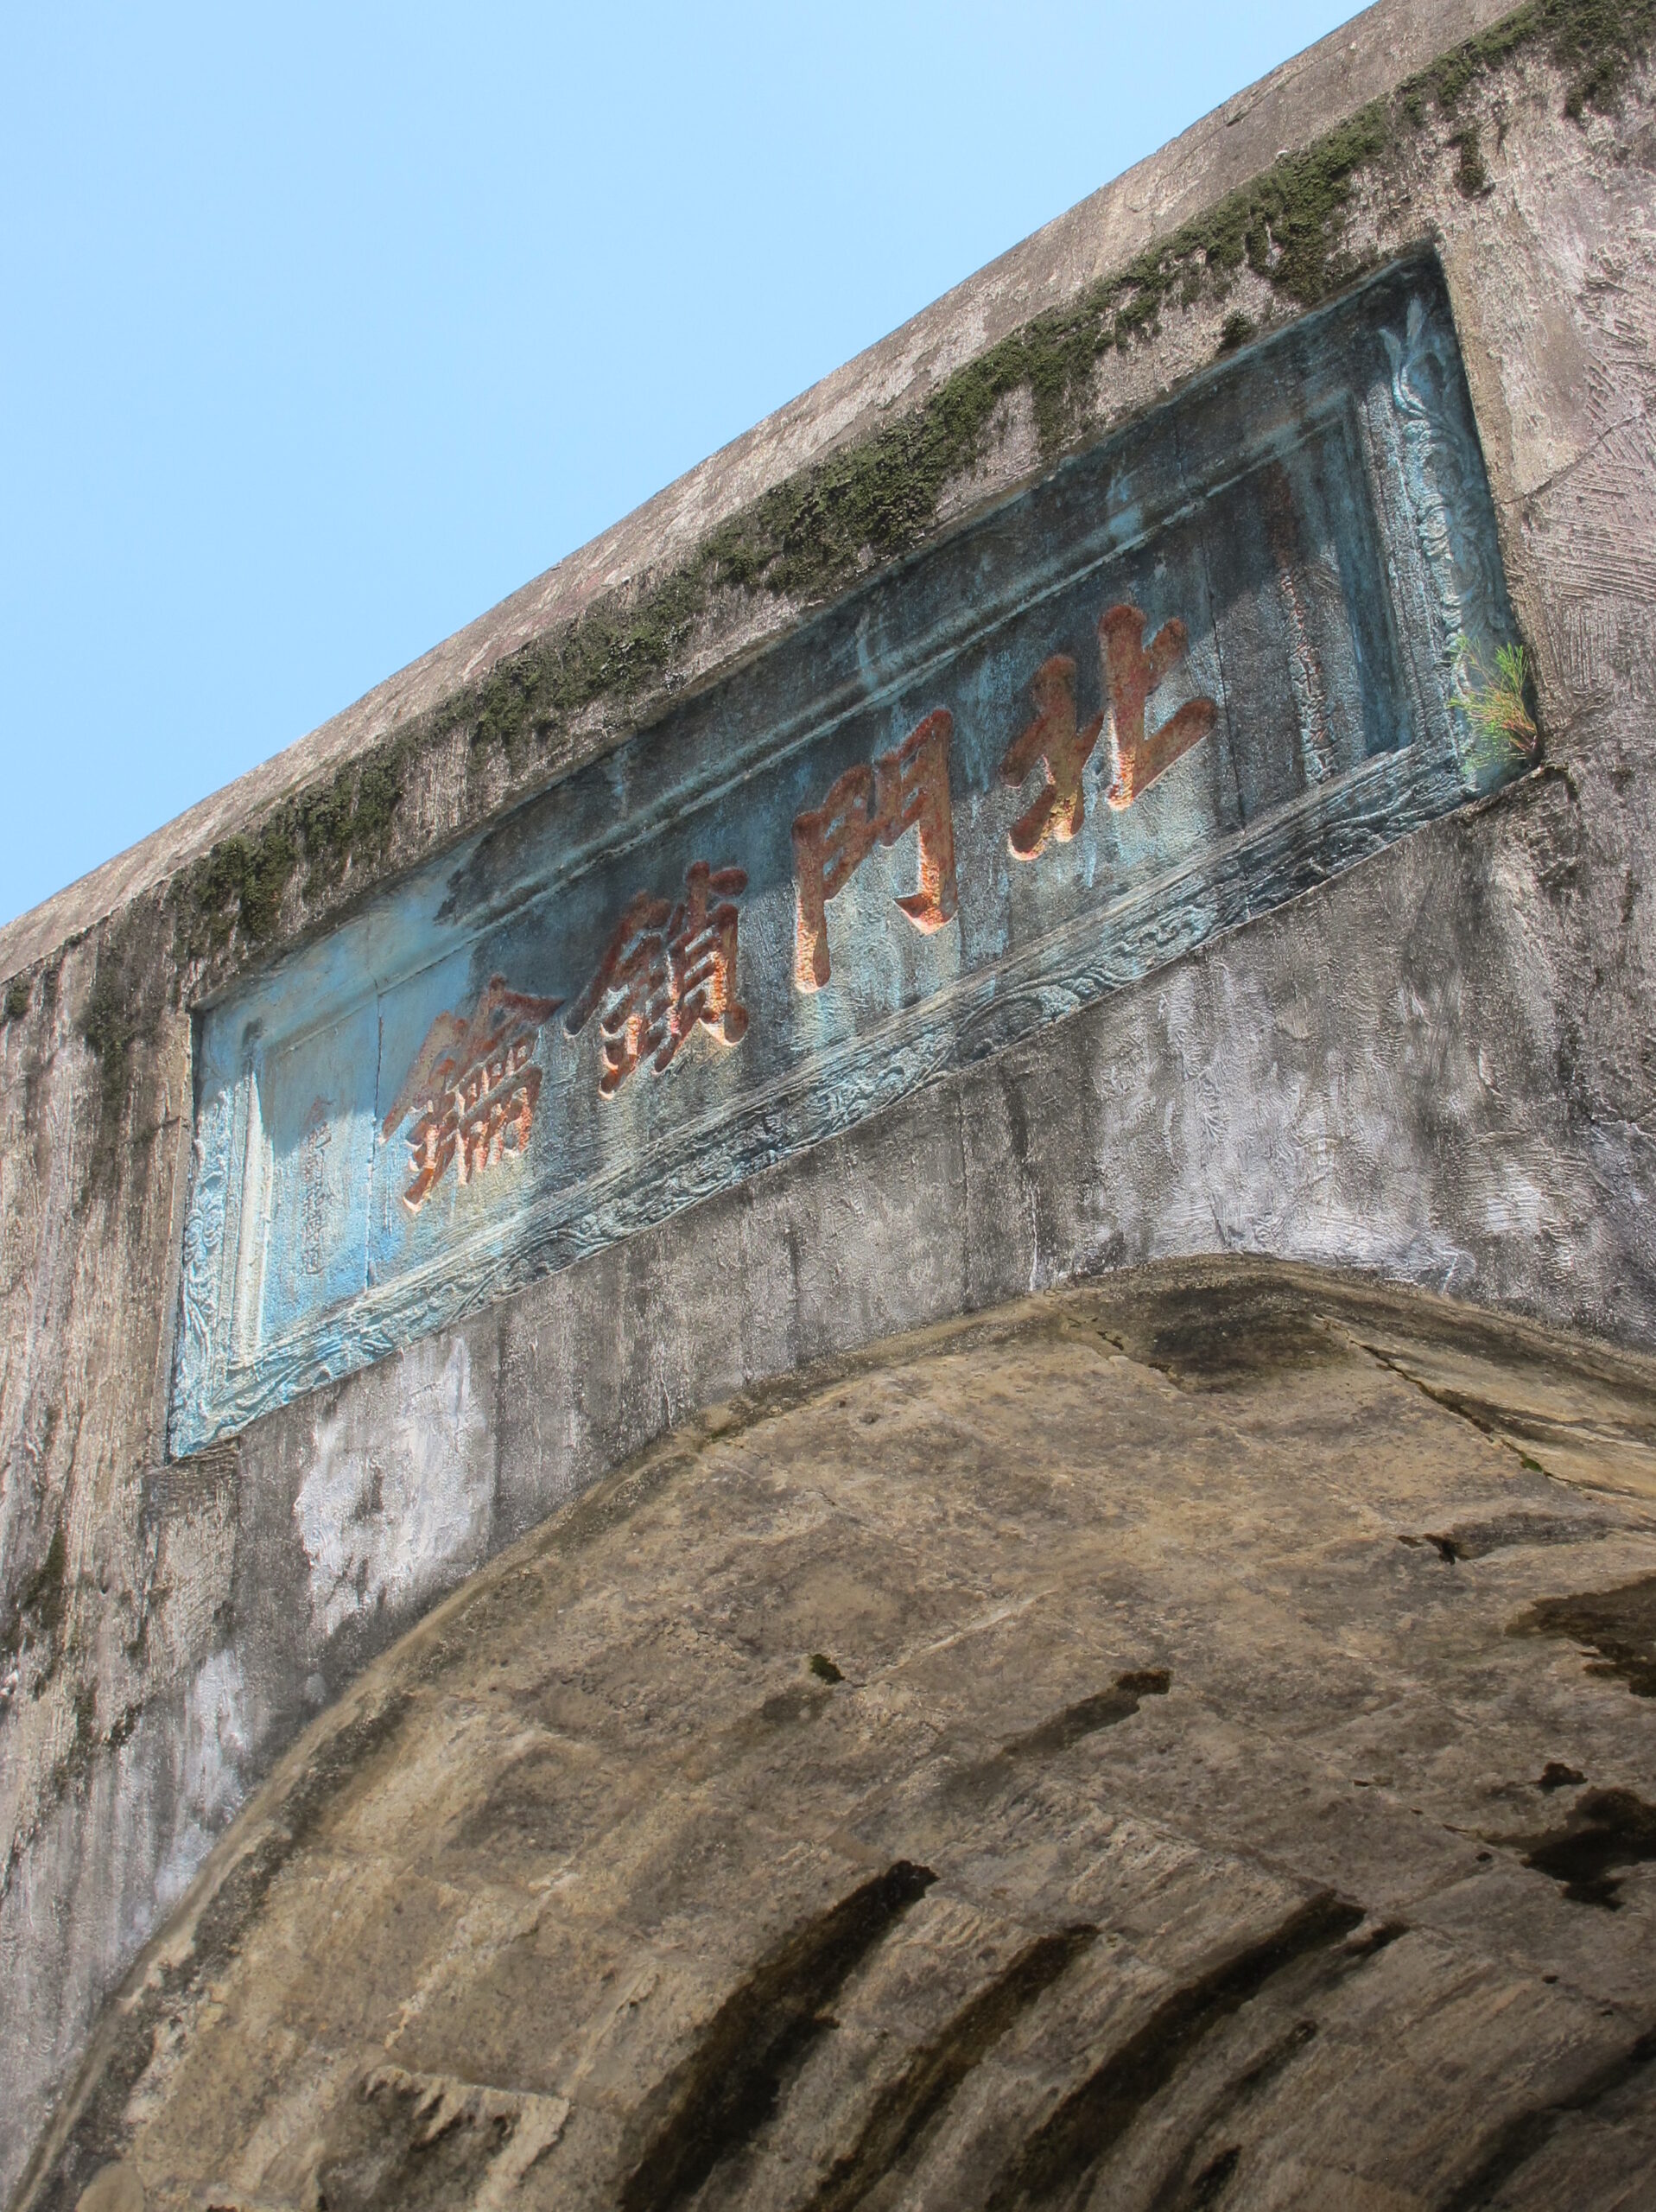 Tamsui's 19th-century Hobe Fort